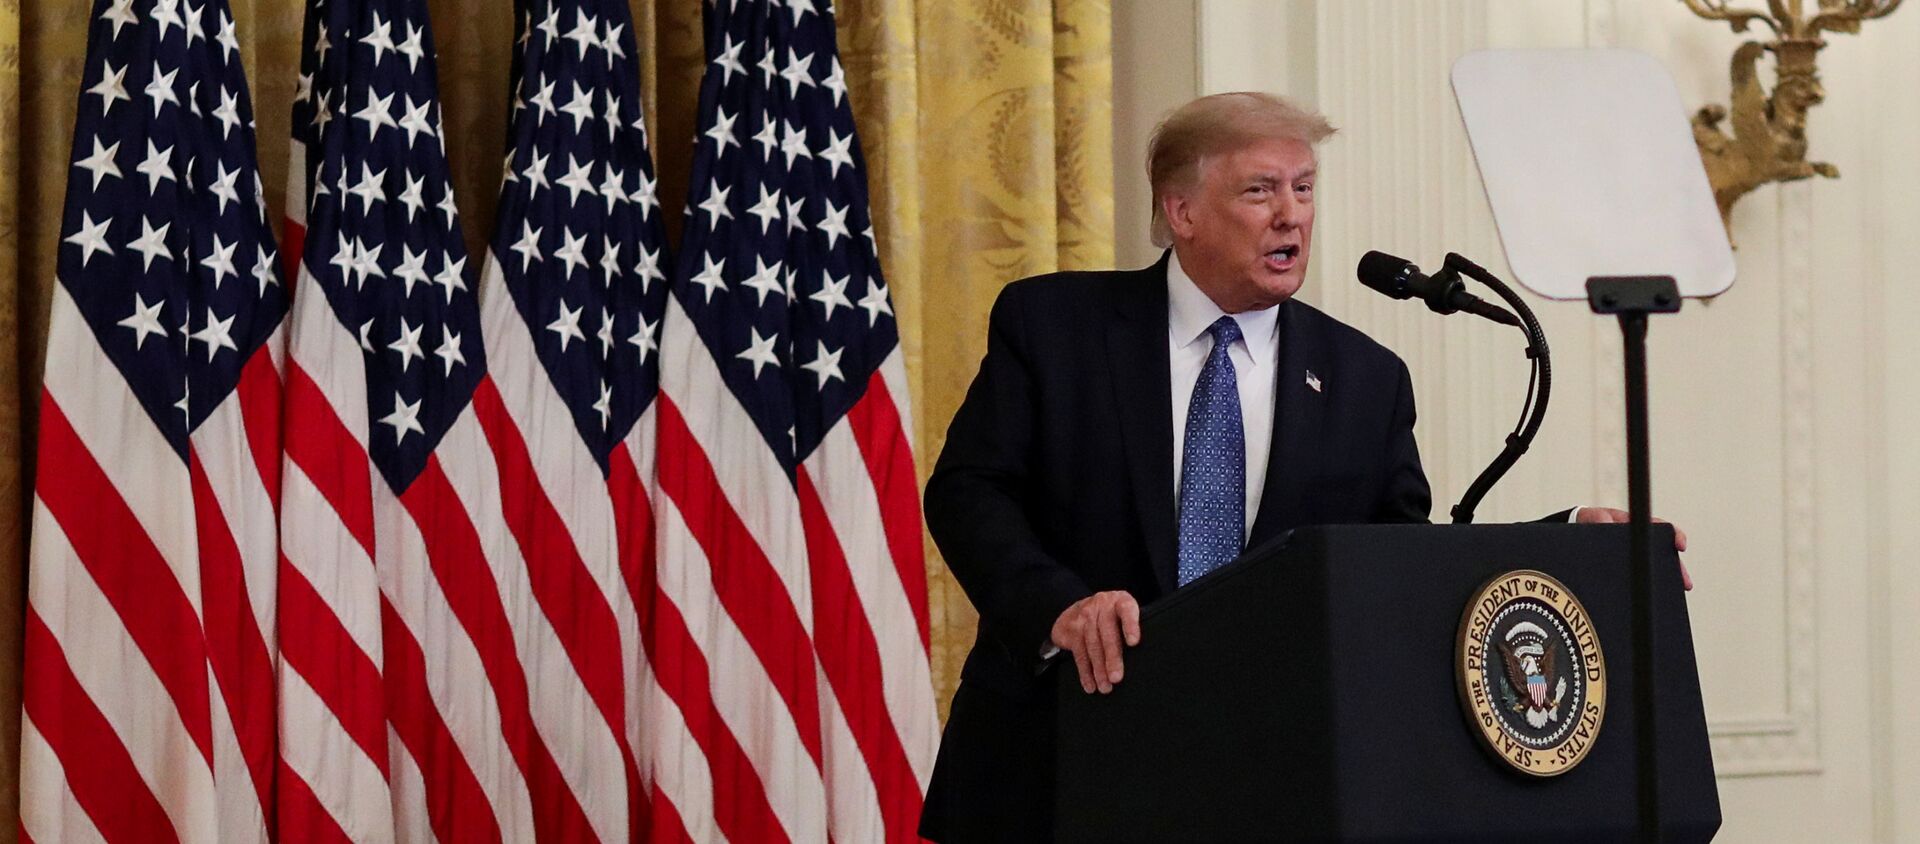 US President Donald Trump speaks about sending federal law enforcement agents to several U.S. cities to assist local police in combating what the Justice Department has described as a “surge” of violent crime, in the East Room at the White House in Washington, US, July 22, 2020. - Sputnik International, 1920, 18.08.2020